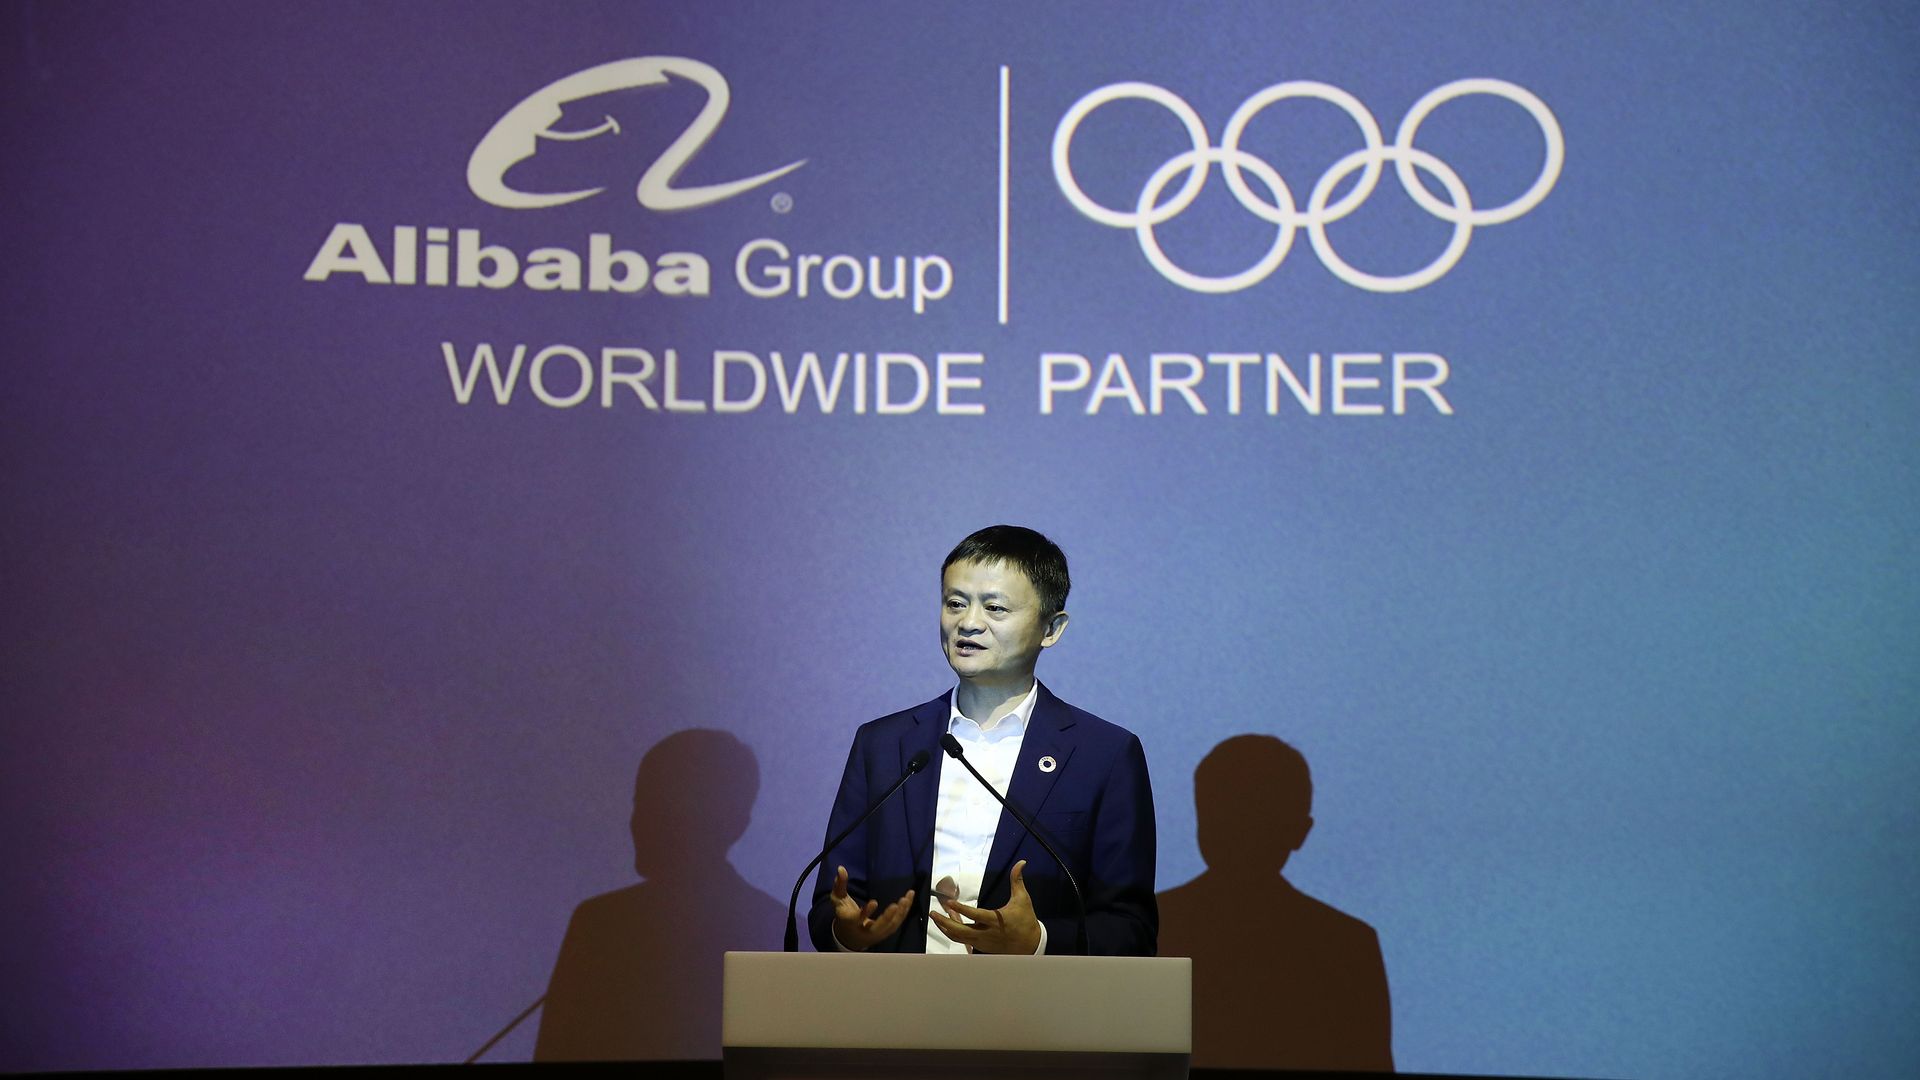  Alibaba Group Executive Chairman Jack Ma speaks at the unveiling of the Alibaba Showcase at the PyeongChang 2018 Winter Olympic Games on February 10, 2018 in Gangneung, South Korea. 